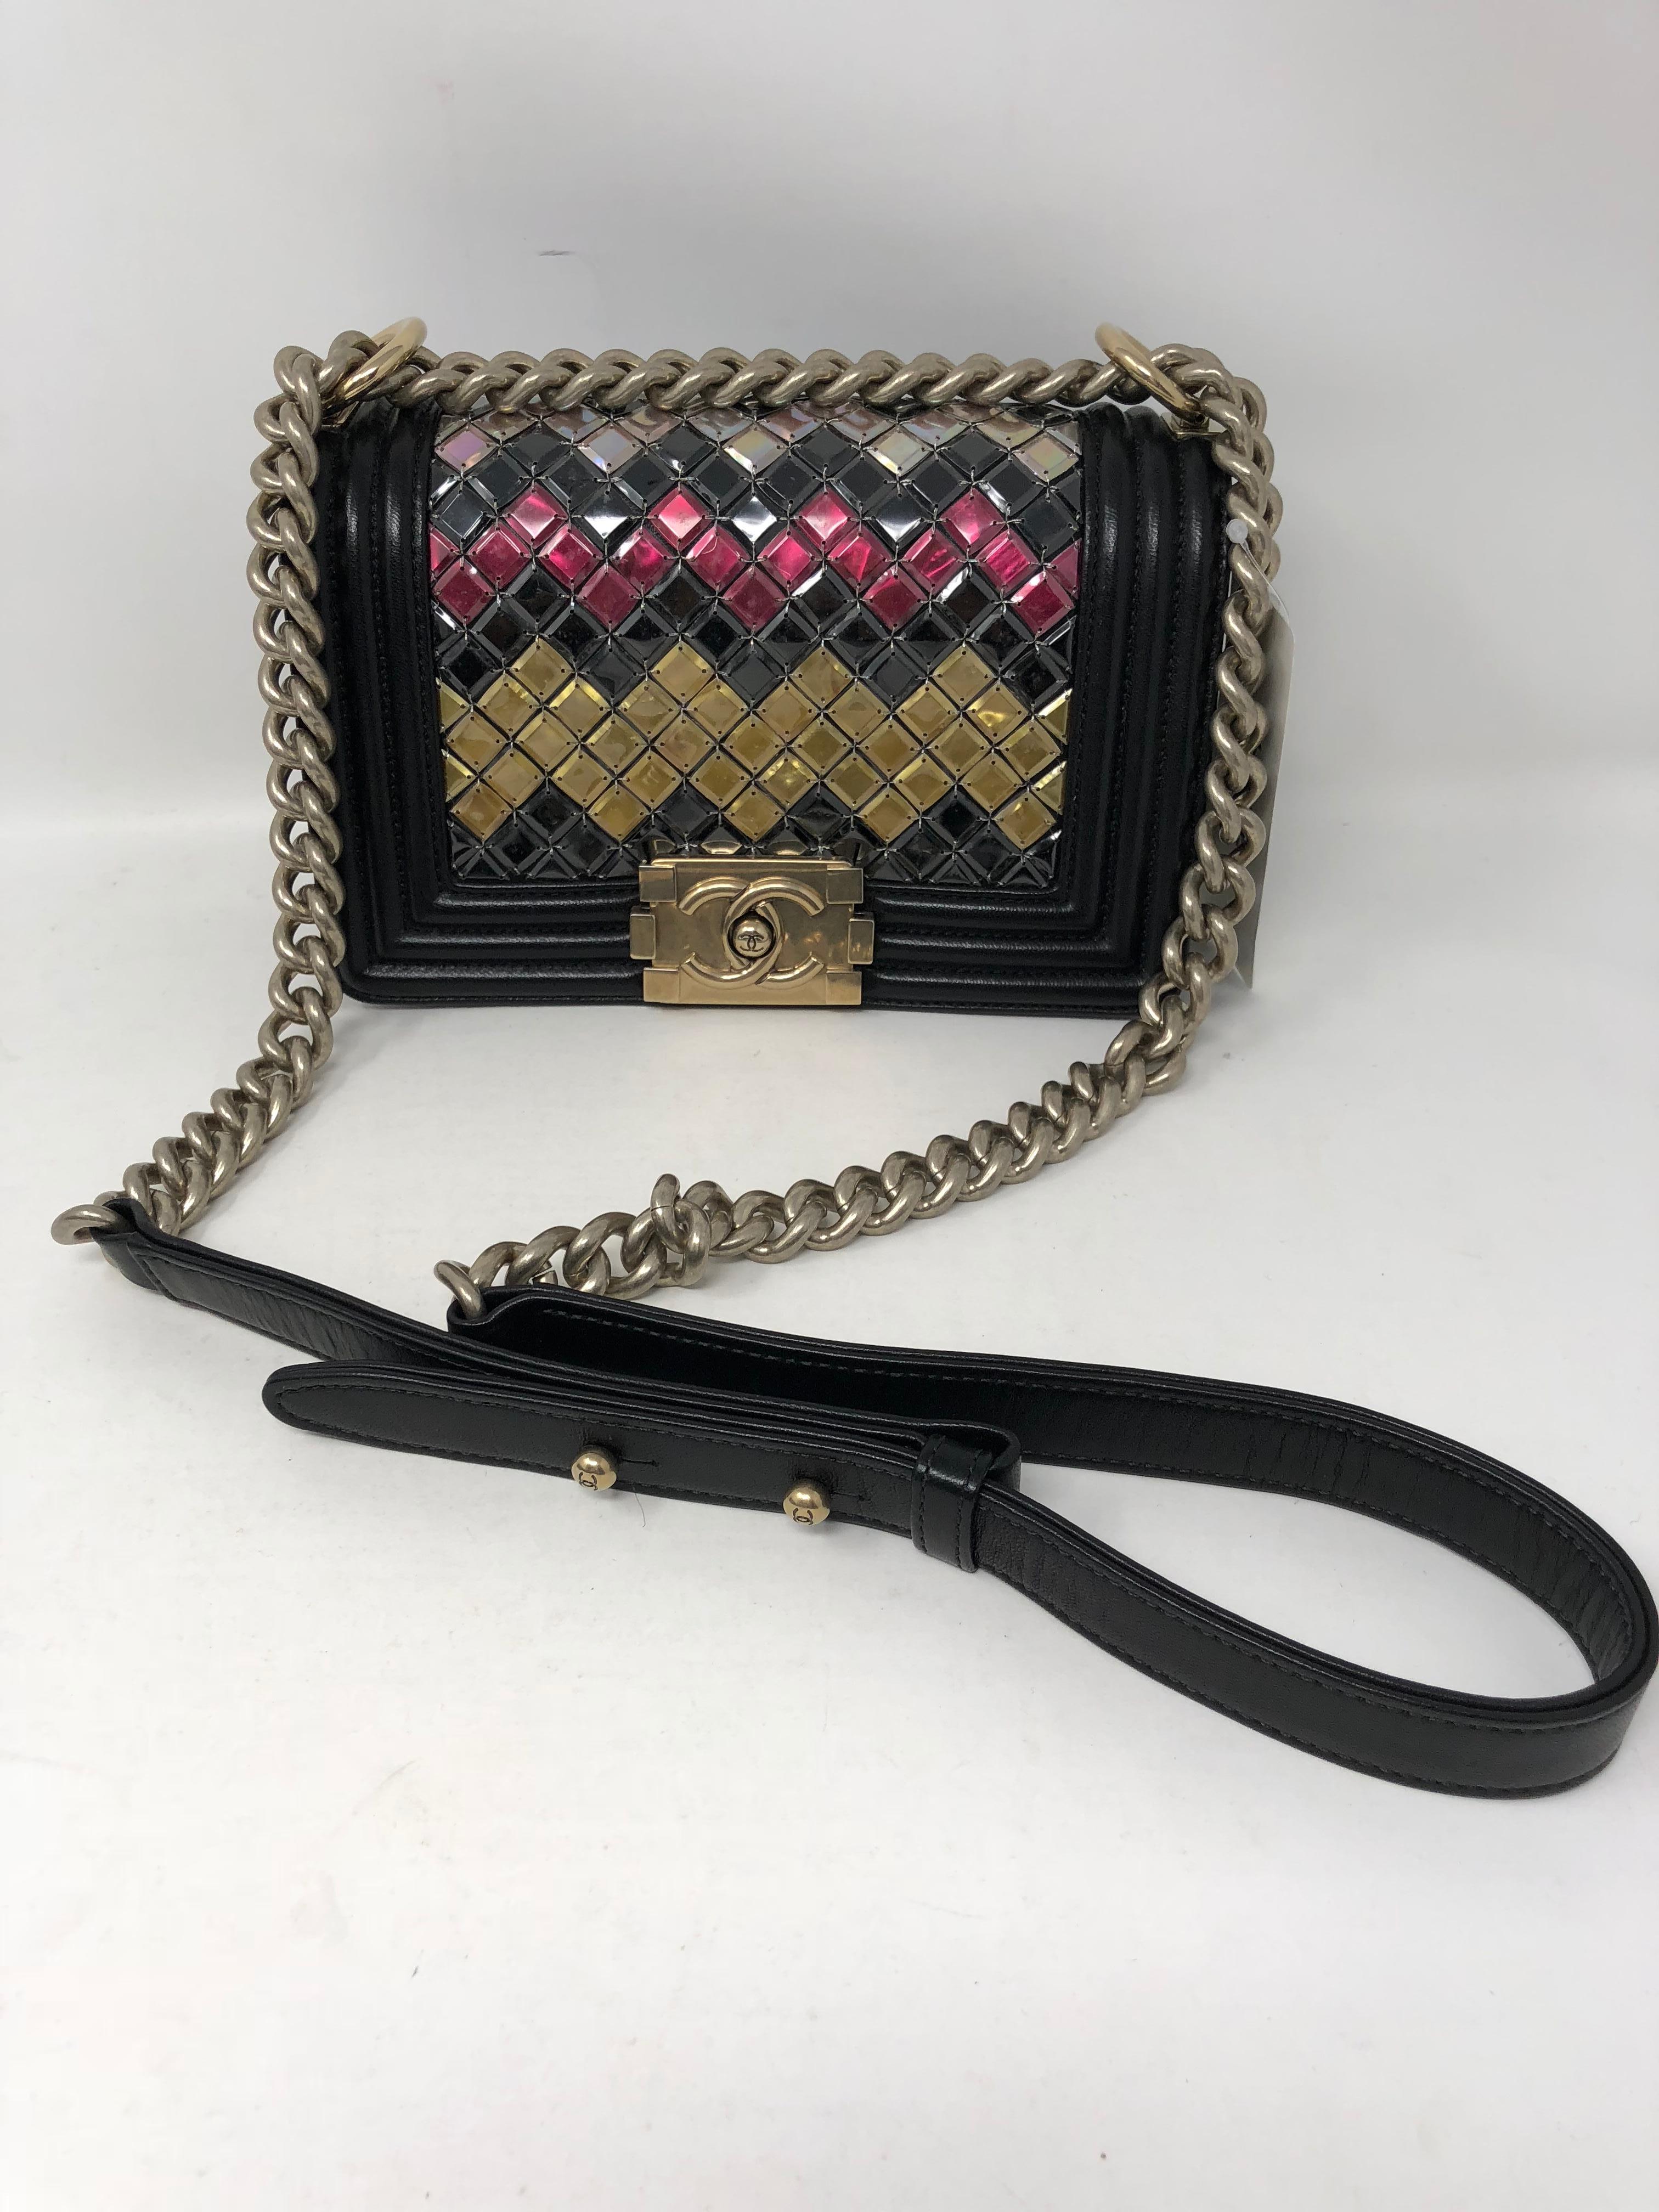 Chanel Black/ multi color sequins Boy bag. Antiqued gold hardware. Limited and rare Boy Bag. Small size Boy with adjustable strap. Unique patterning throughout the bag. Looks snakeskin like but is made with irredescent sequins hand woven with metal.